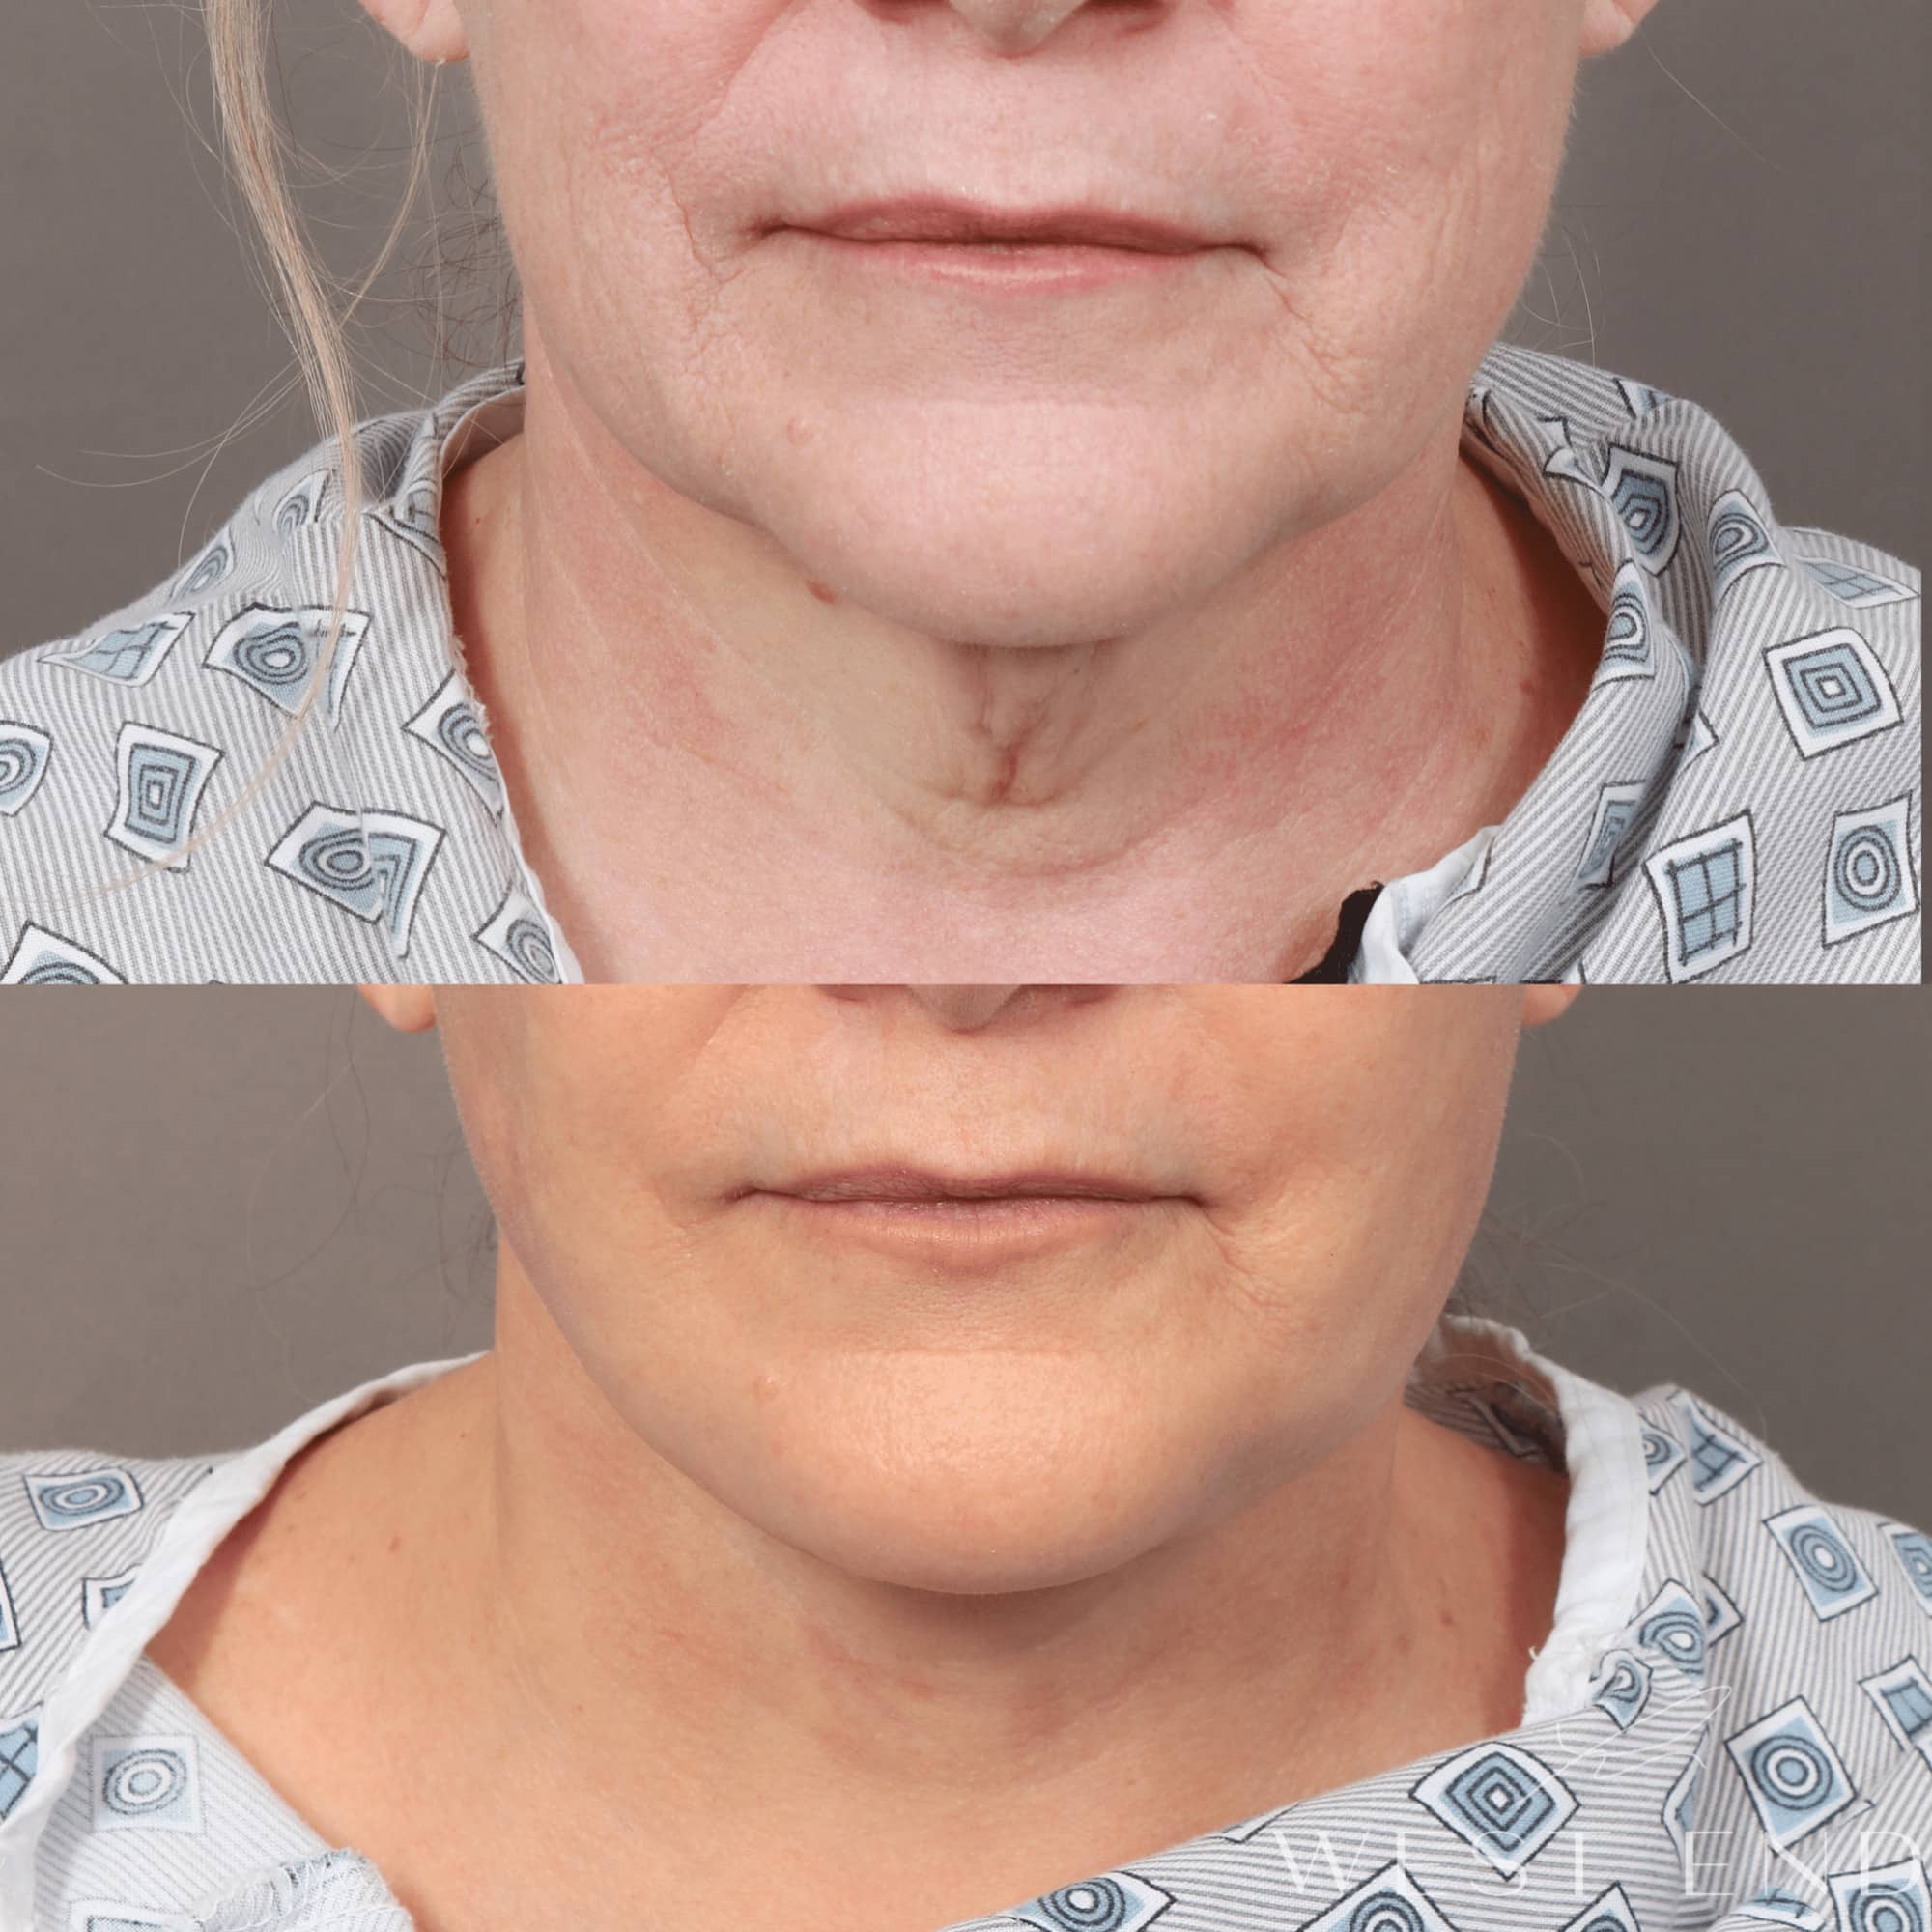 Deep Plane Facelift & Neck Lift, Fat Grafting, and CO2 Resurfacing (2 Months Post-op)